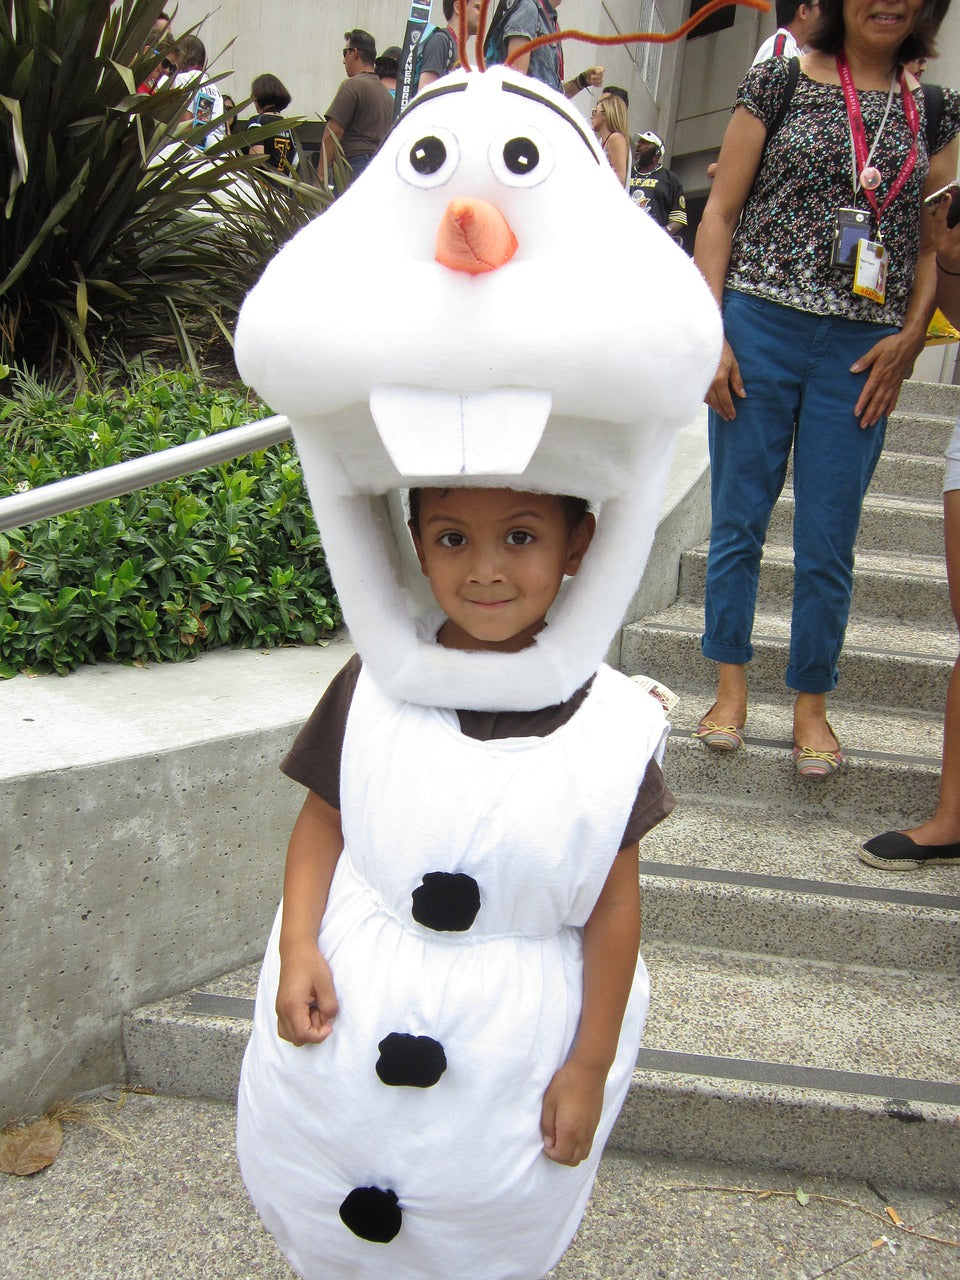 Child dressed in Olaf the snowman costume